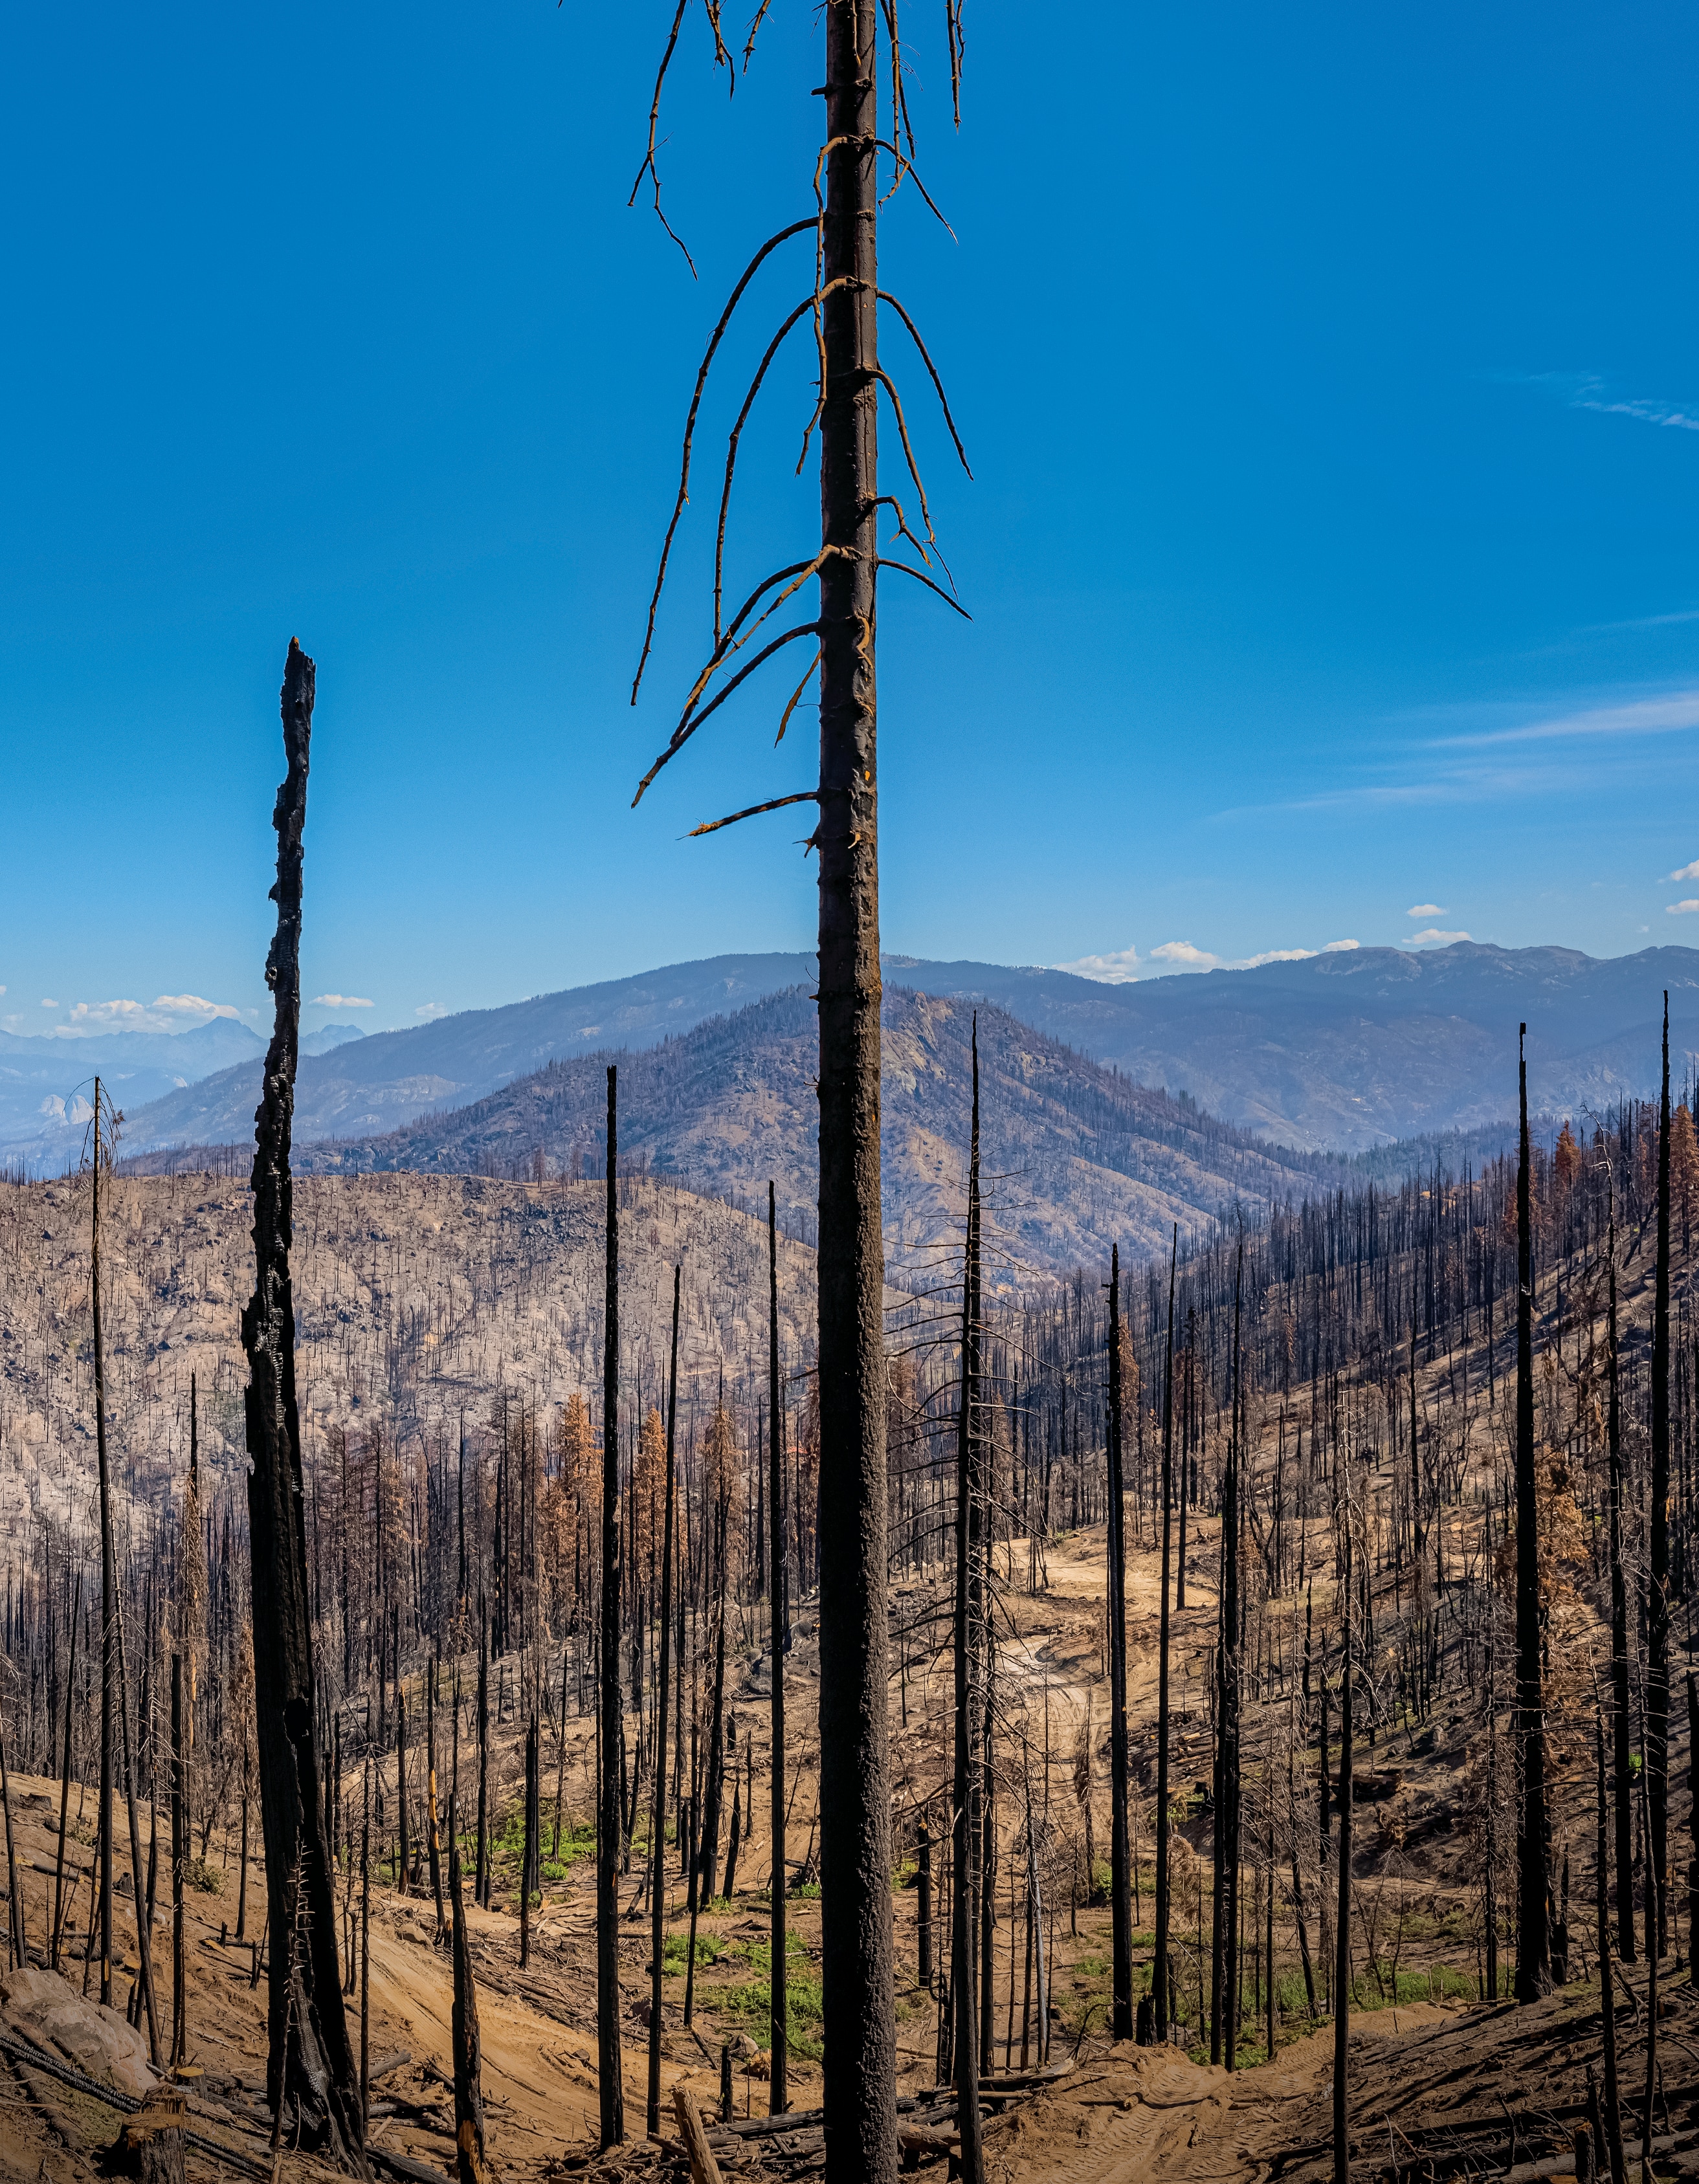 Trees impacted by forest fire stand in a mountain setting